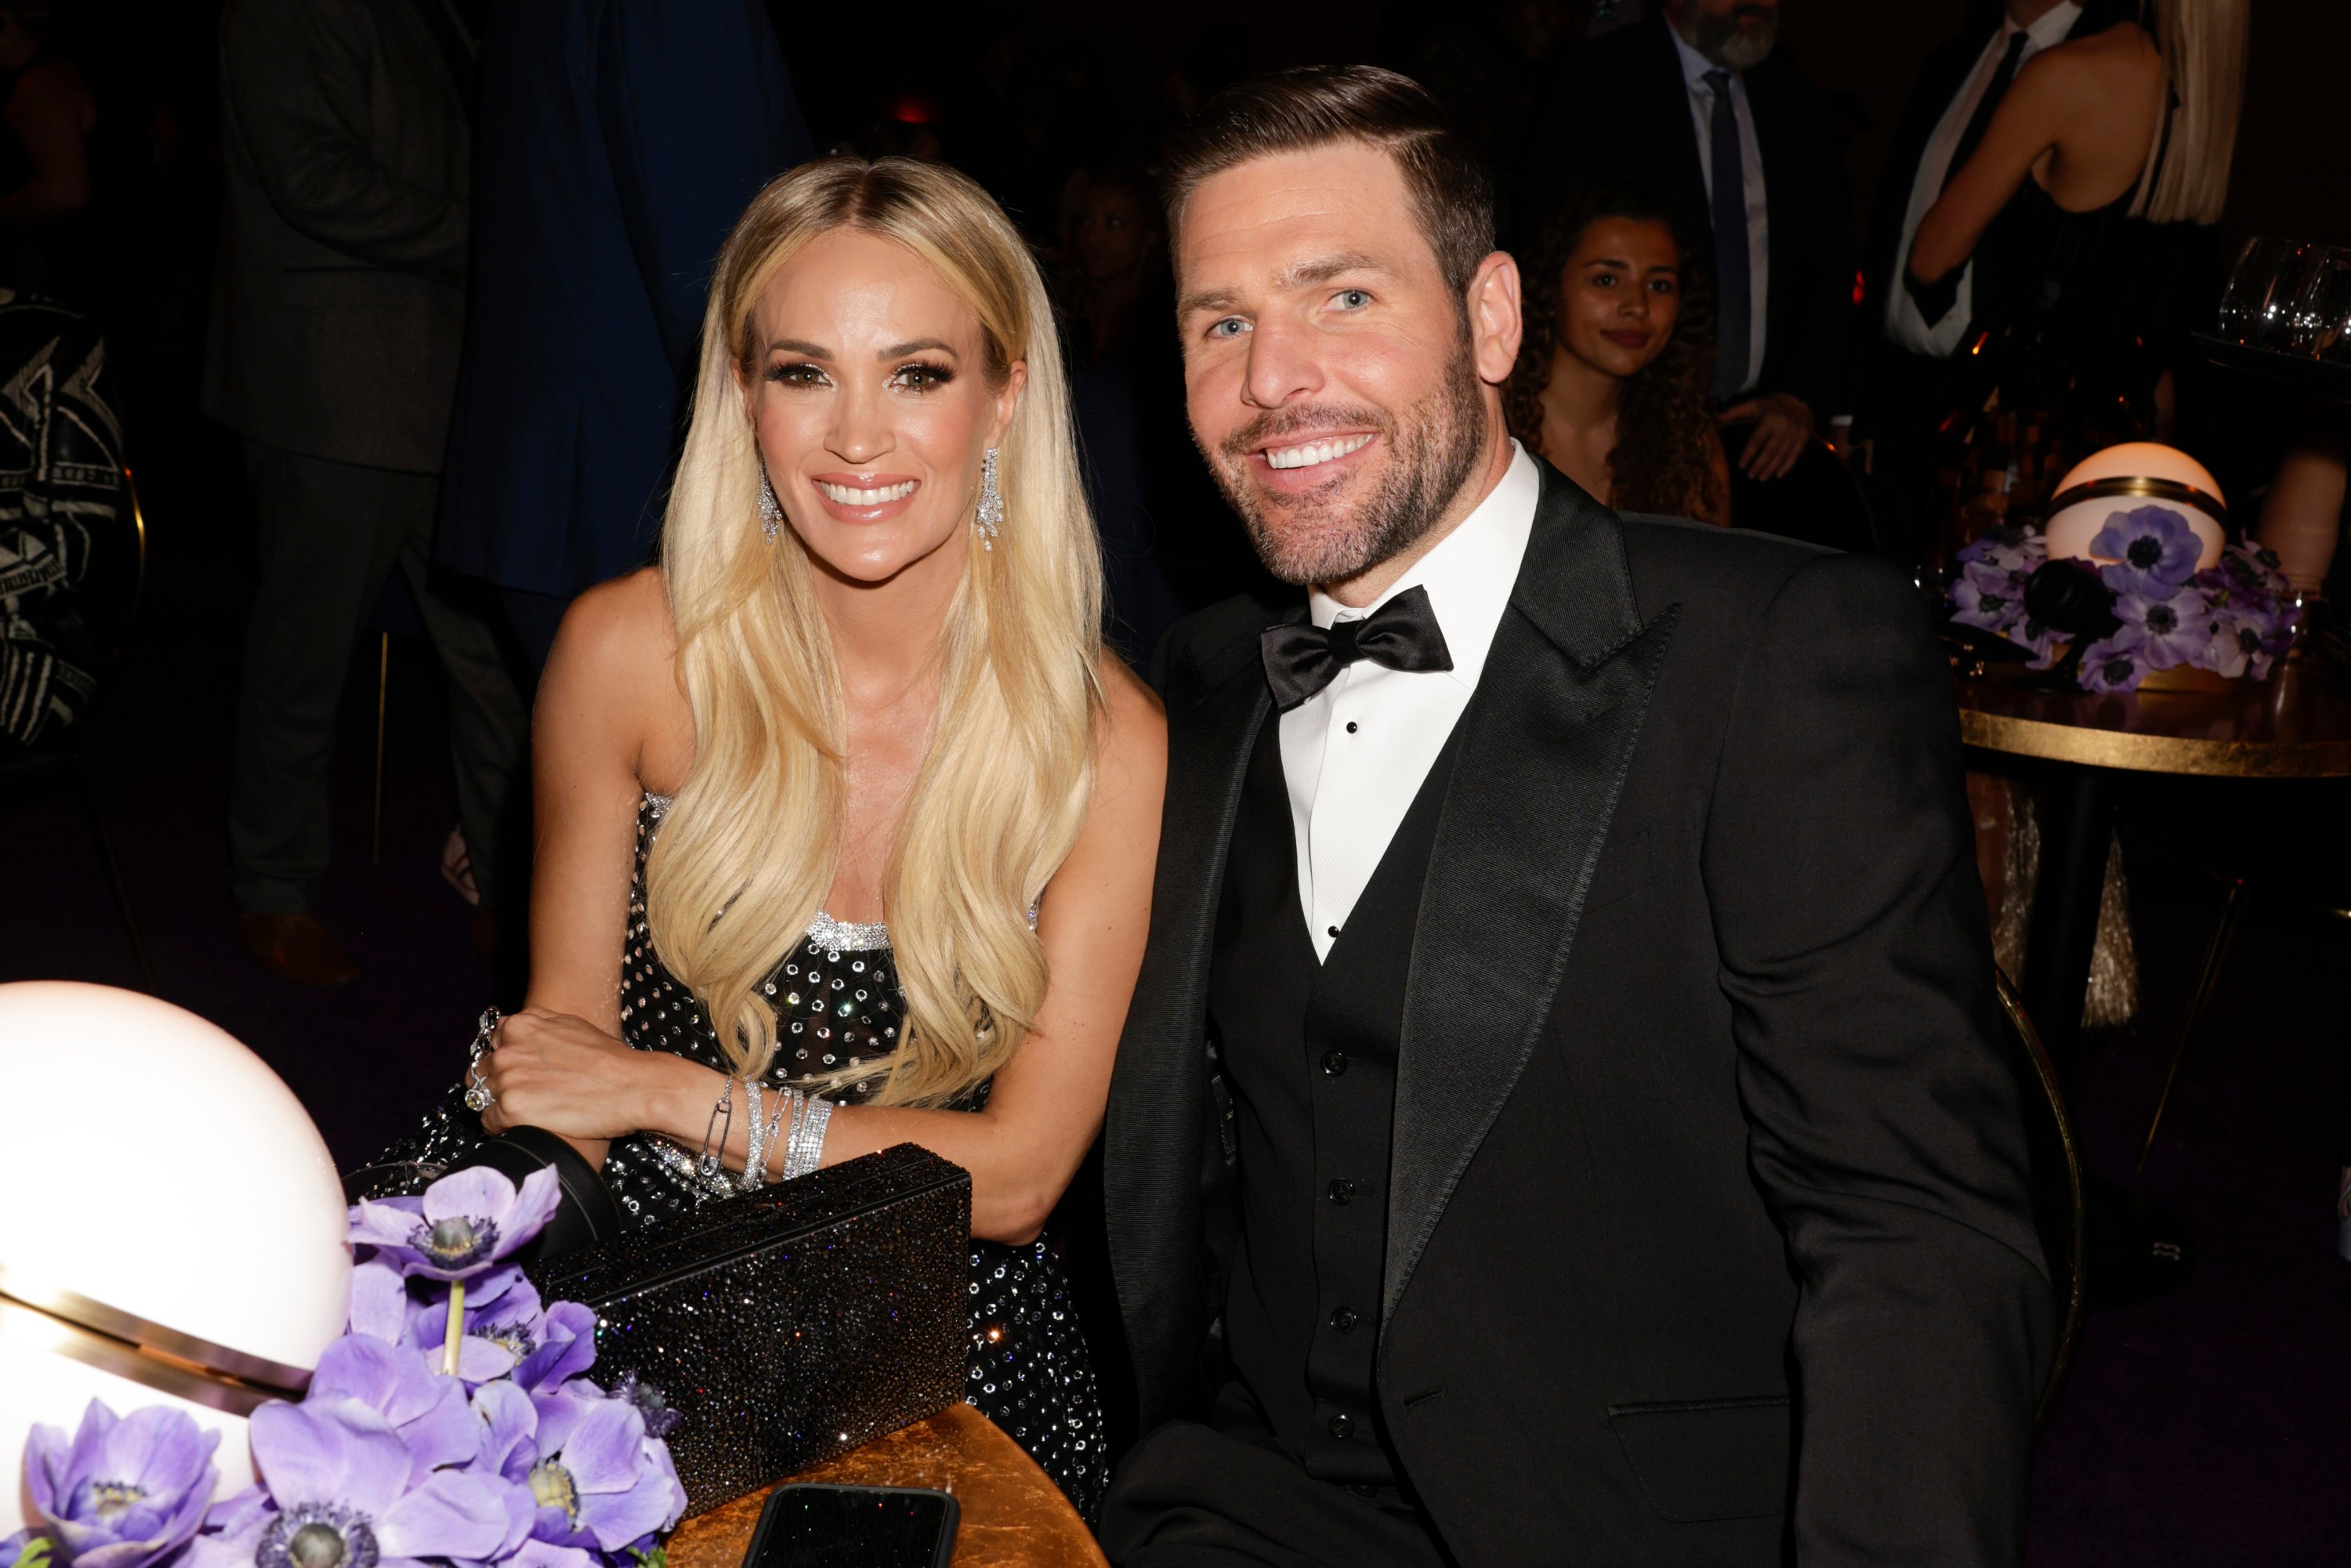 Carrie Underwood and Mike Fisher smile at a camera while sitting together at a table